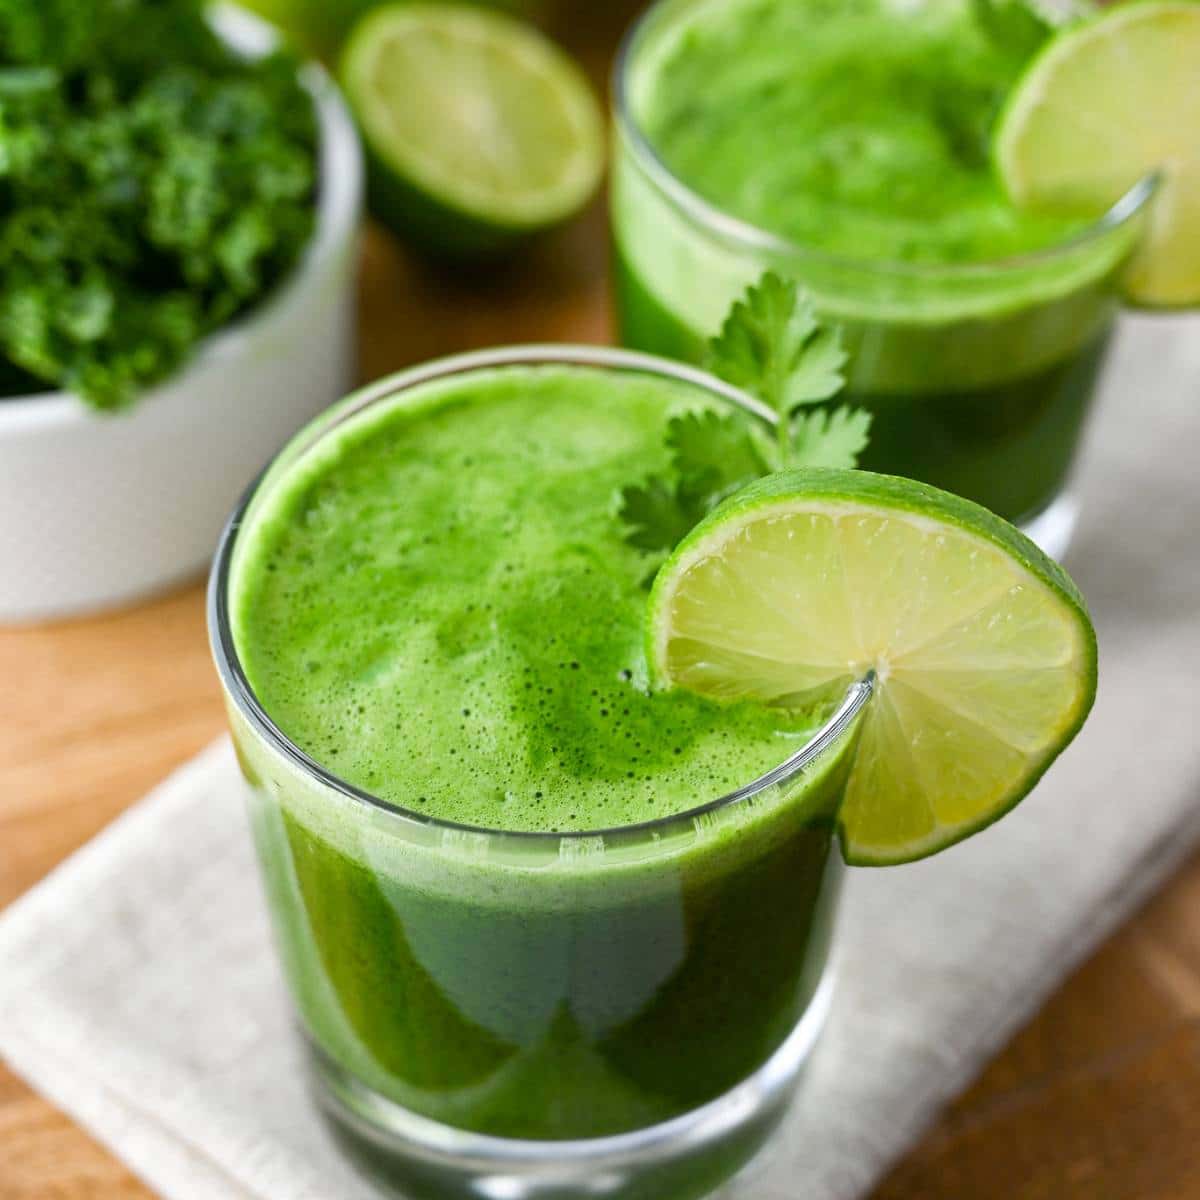 two glasses of green juice with a bowl of kale behind them